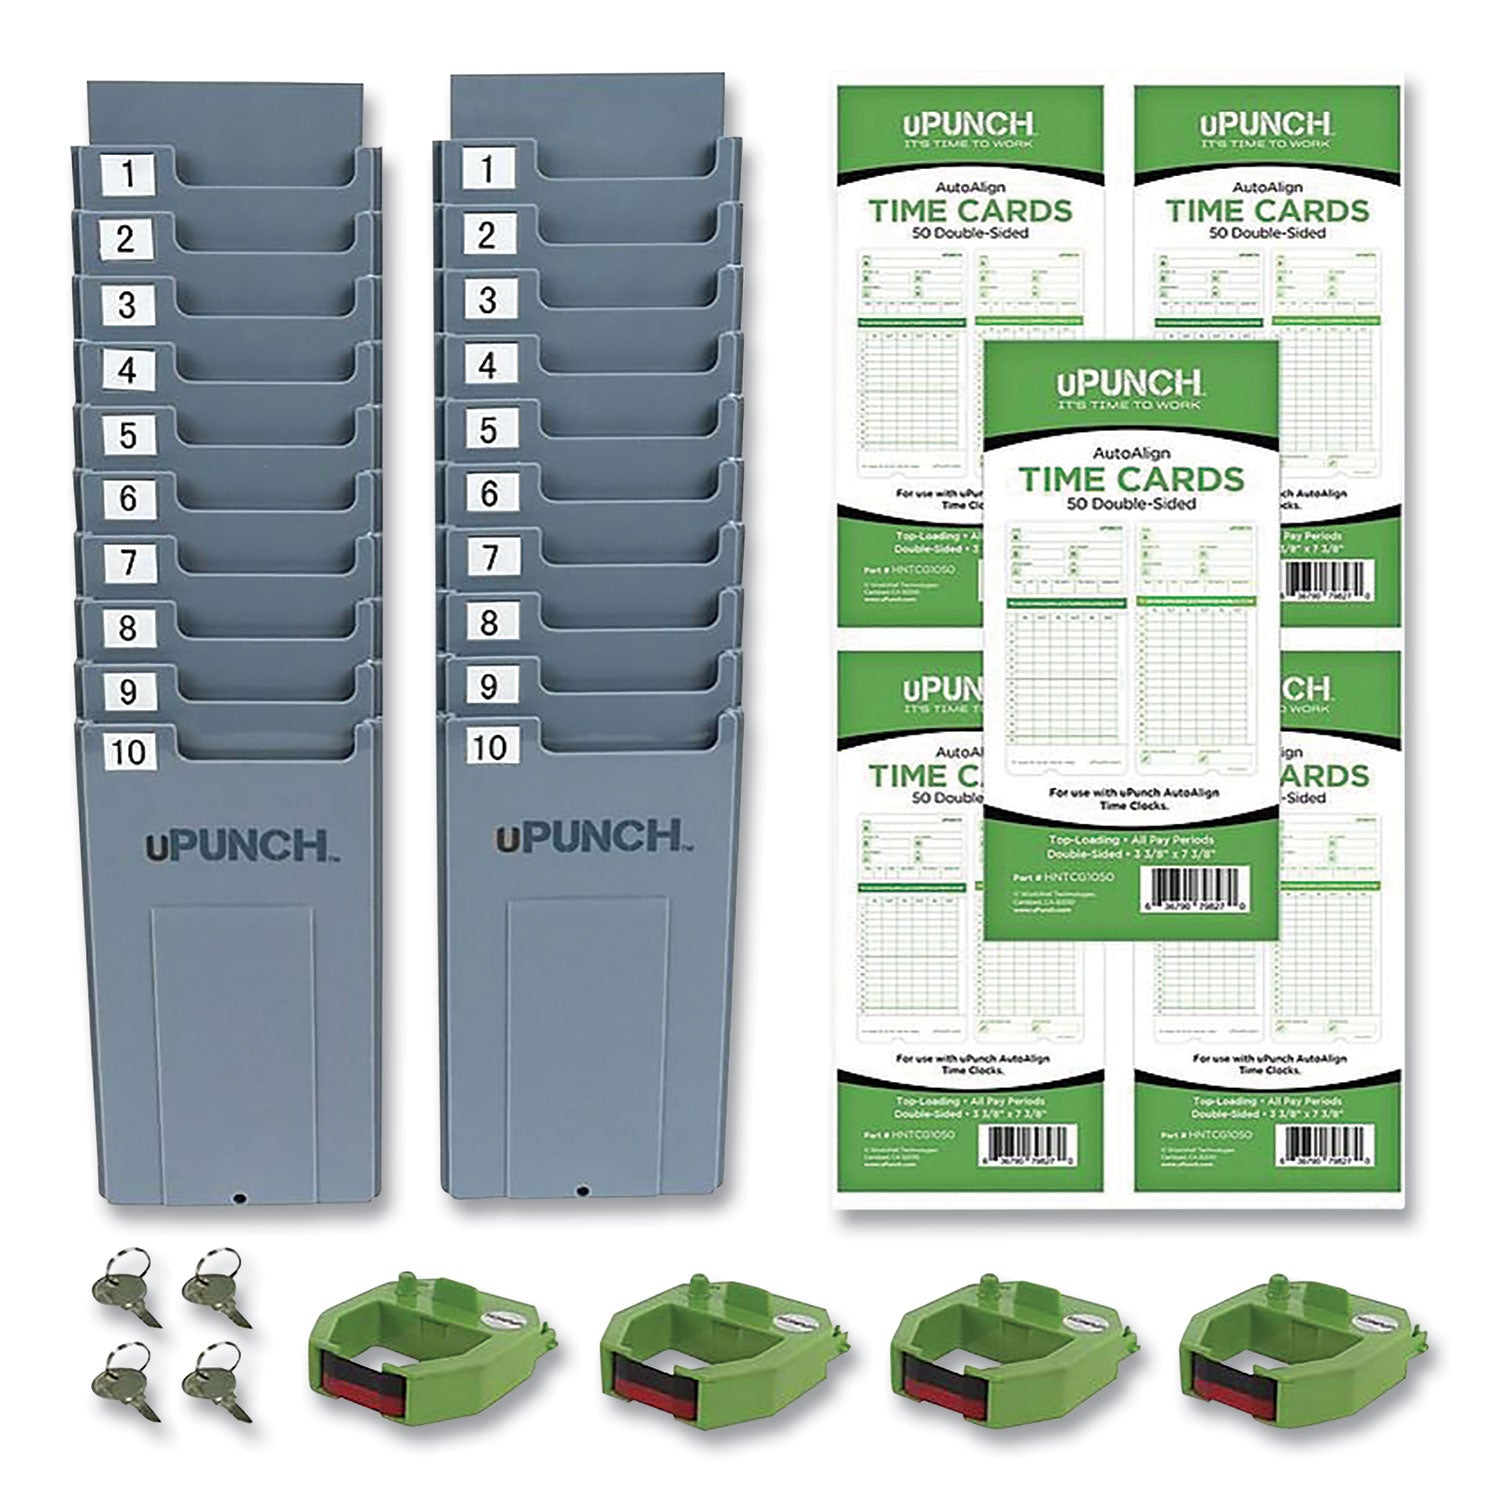 ub1000-electronic-non-calculating-time-clock-bundle-lcd-display-beige-green_ppzub1000 - 7